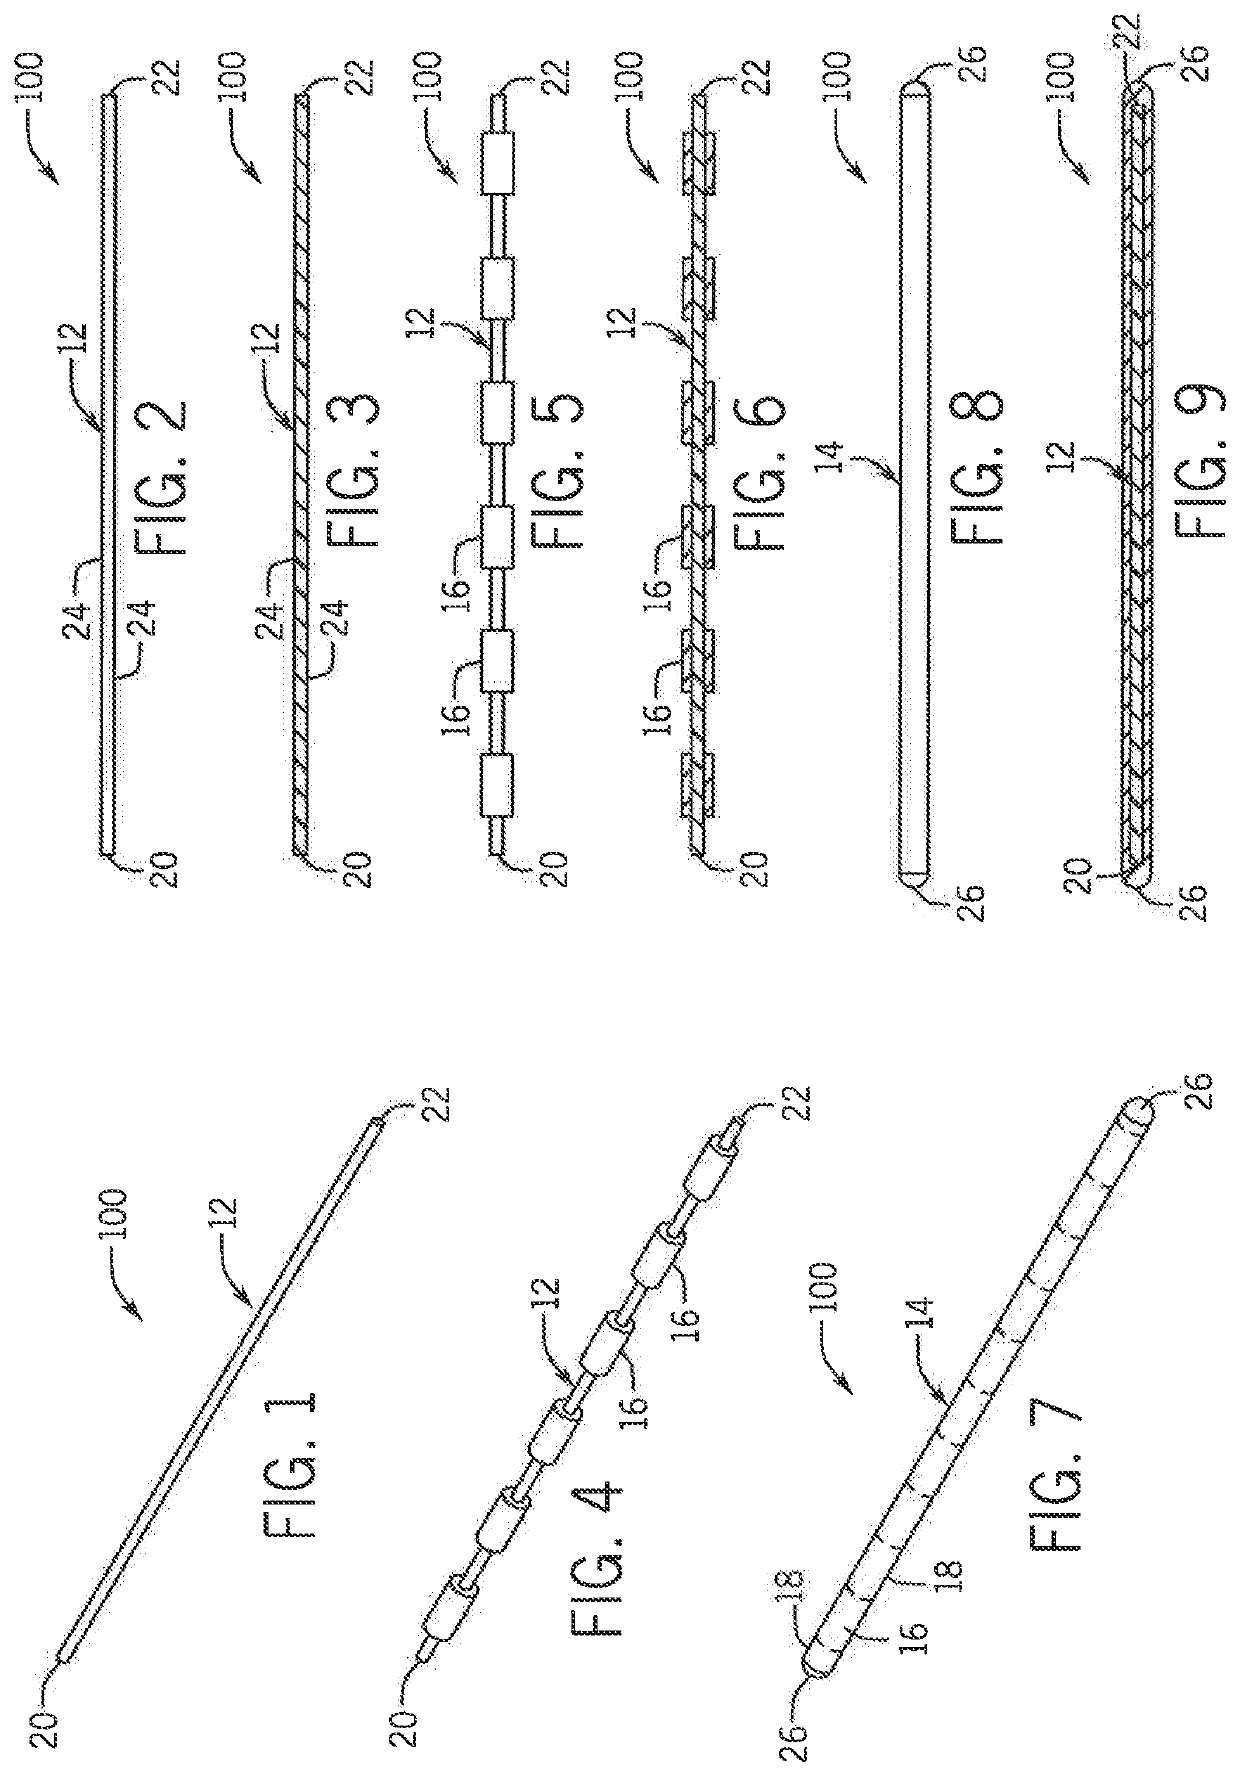 Method of forming a reusable surgical implement